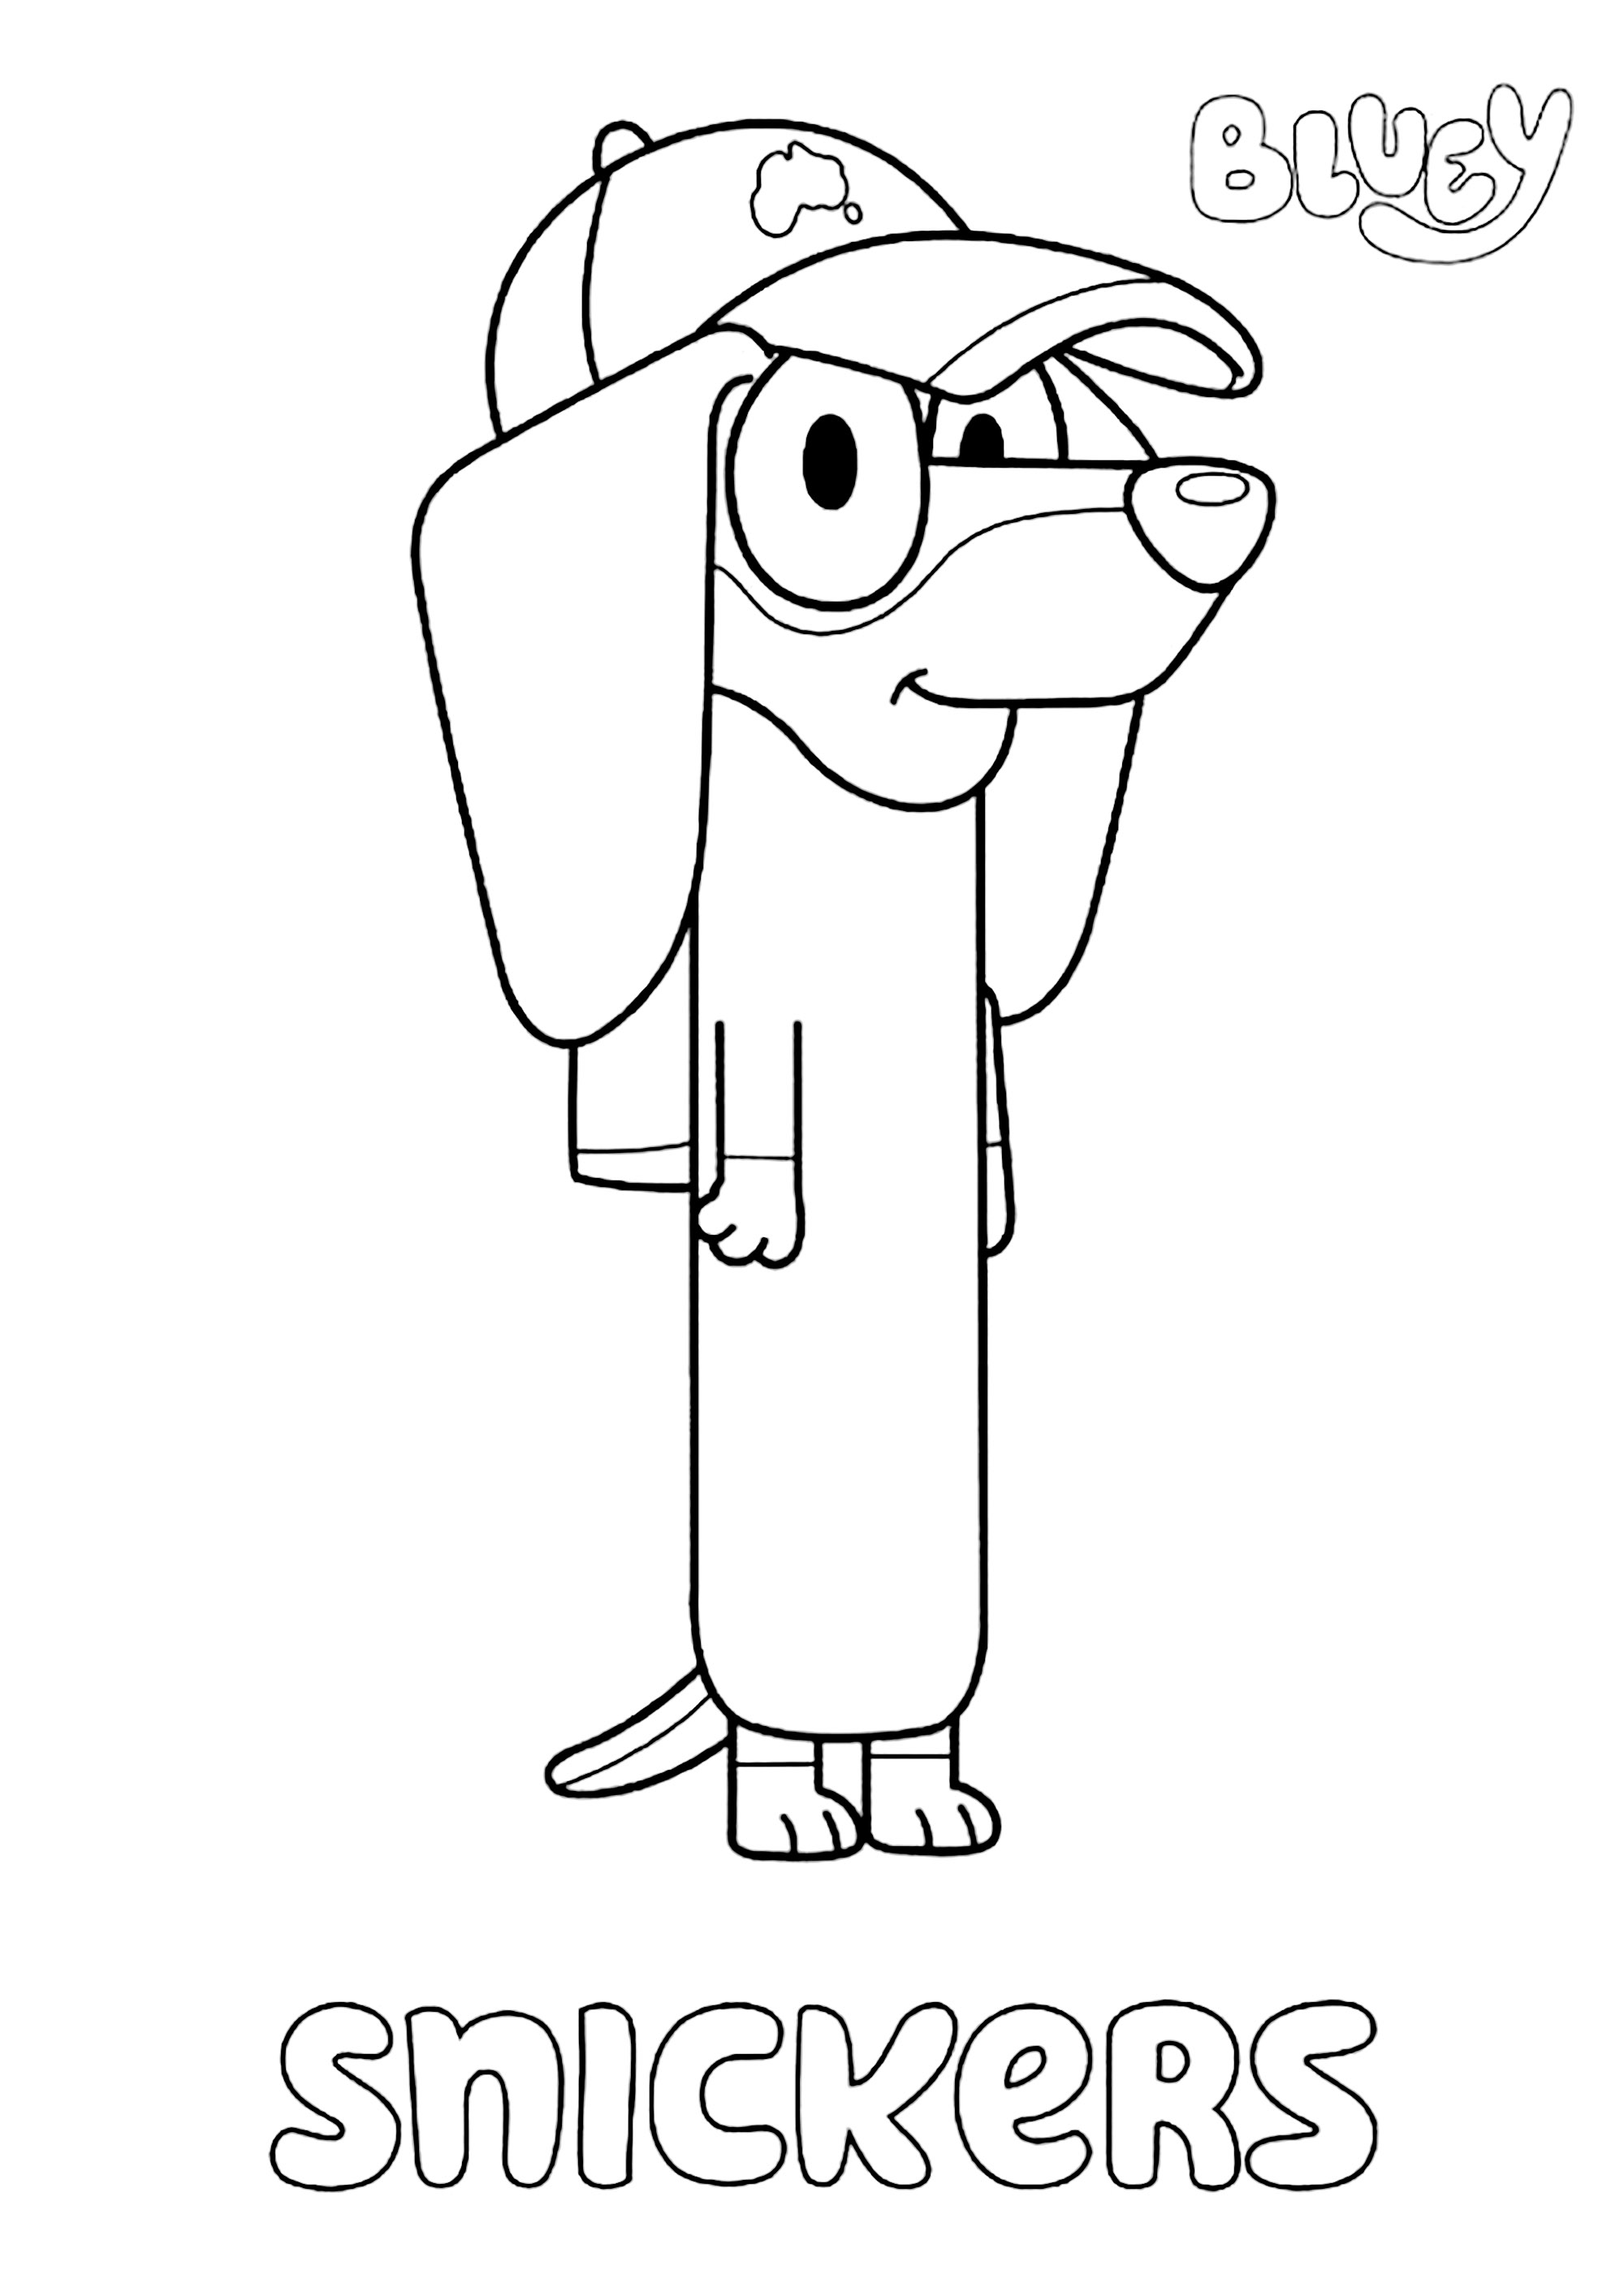 Easy free Bluey coloring page to download